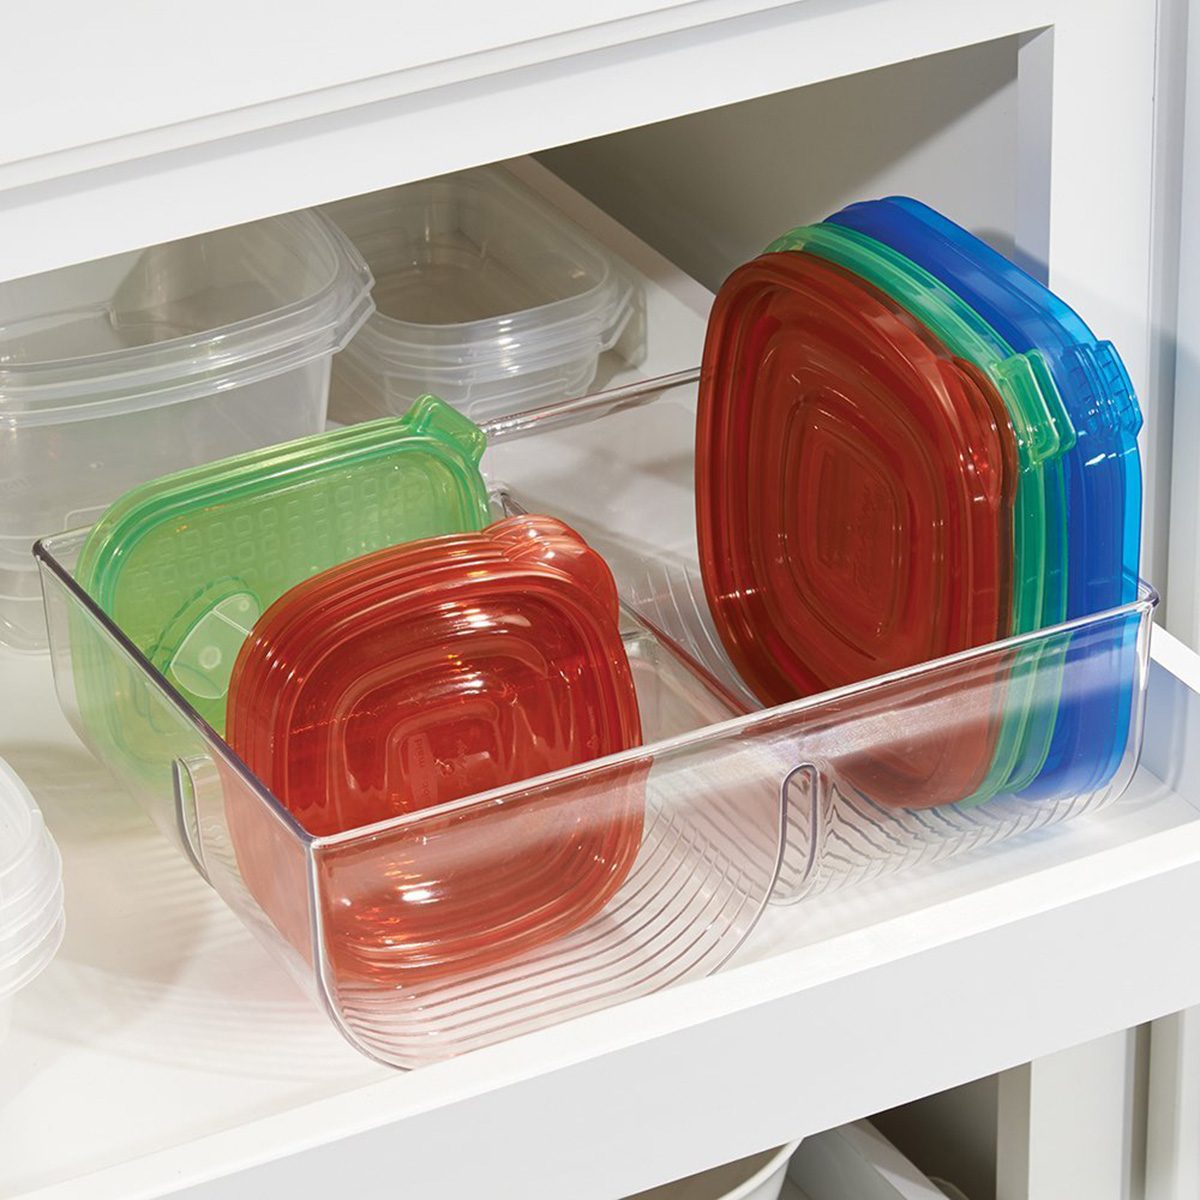 These 19 Kitchen Organizers and Containers Are Editor-Approved